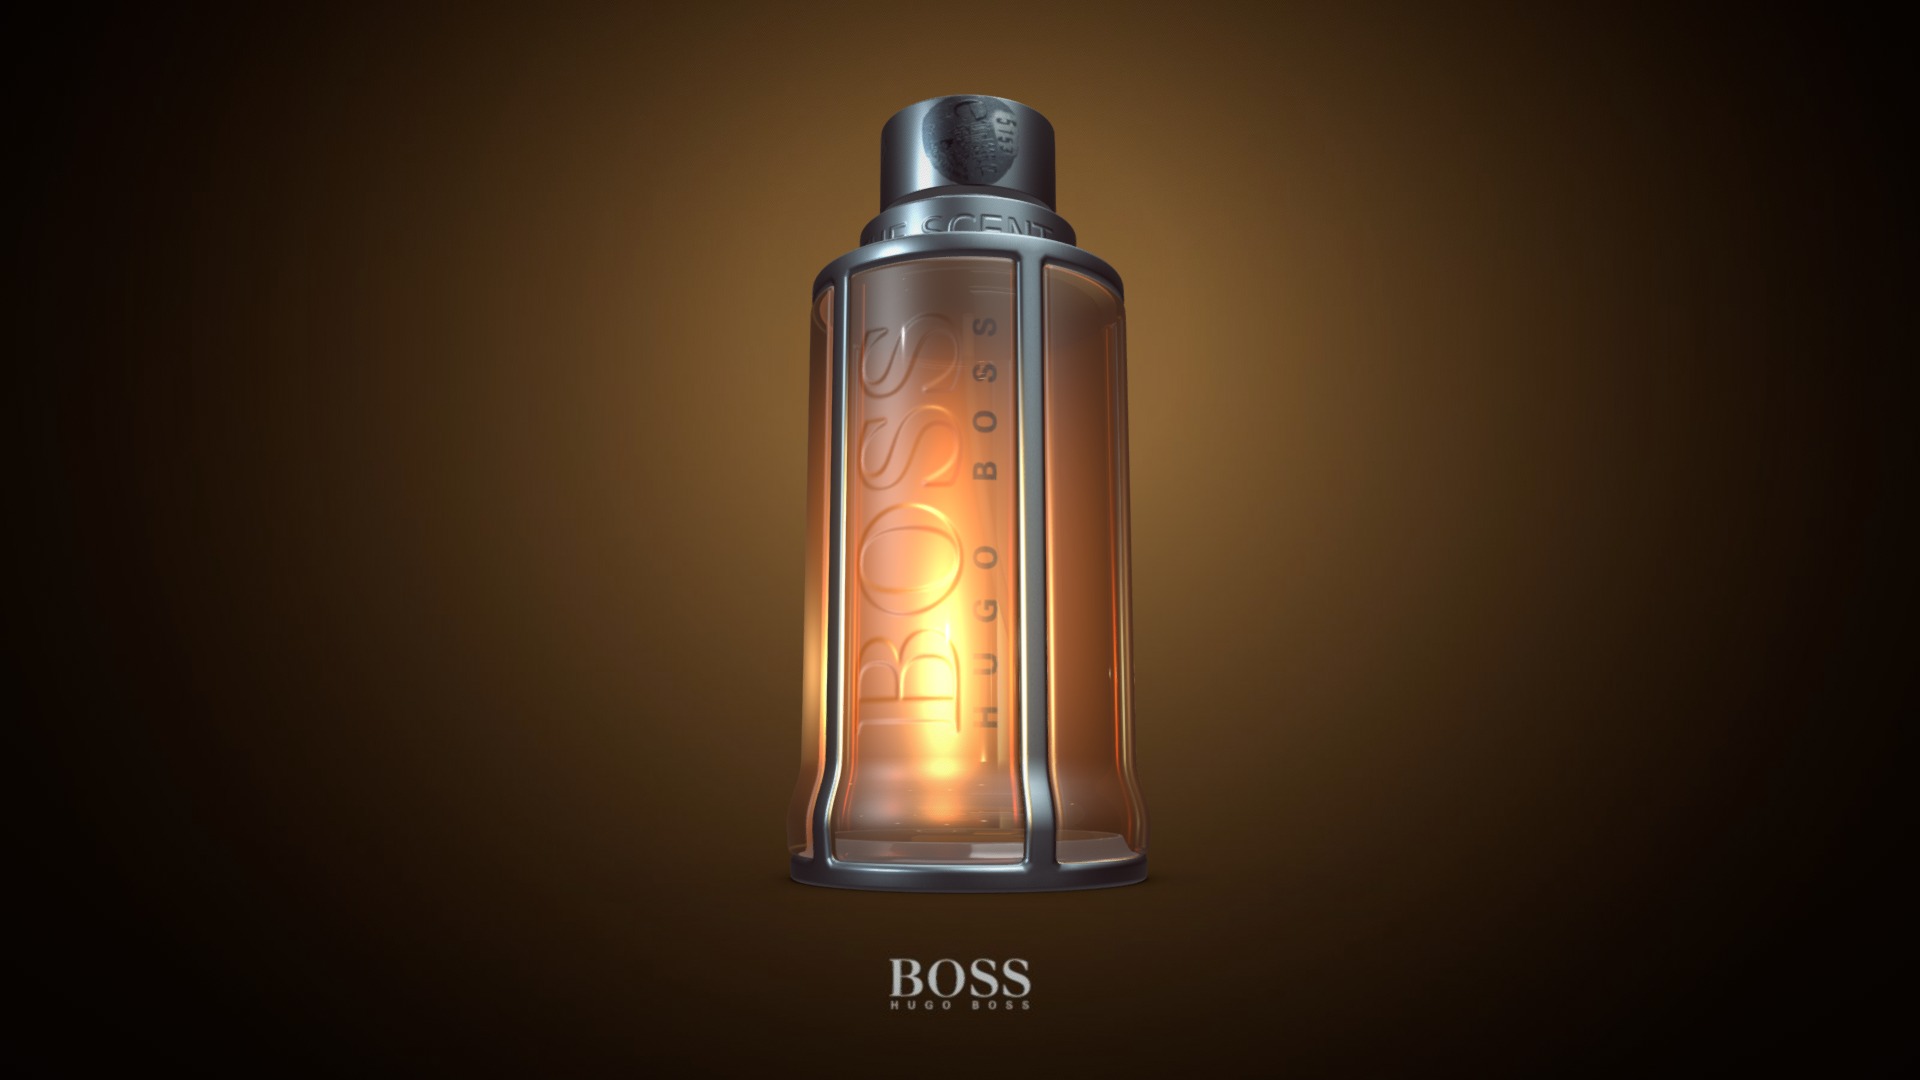 HUGO BOSS has unleashed its first seductive
fragrance for men, BOSS THE SCENT.
Explore the full collection and harness the power
that cannot be resisted.

The Scent is an irresistible fragrance, unforgettable like a savored seduction. Exquisite notes of Ginger, exotic Maninka and Leather unfold over time, seducing the senses.

Discover the full collection on the product page


Model by Shaderbytes - Boss The Scent - by Hugo Boss - Buy Royalty Free 3D model by Virtual Studio (@virtualstudio) 3d model